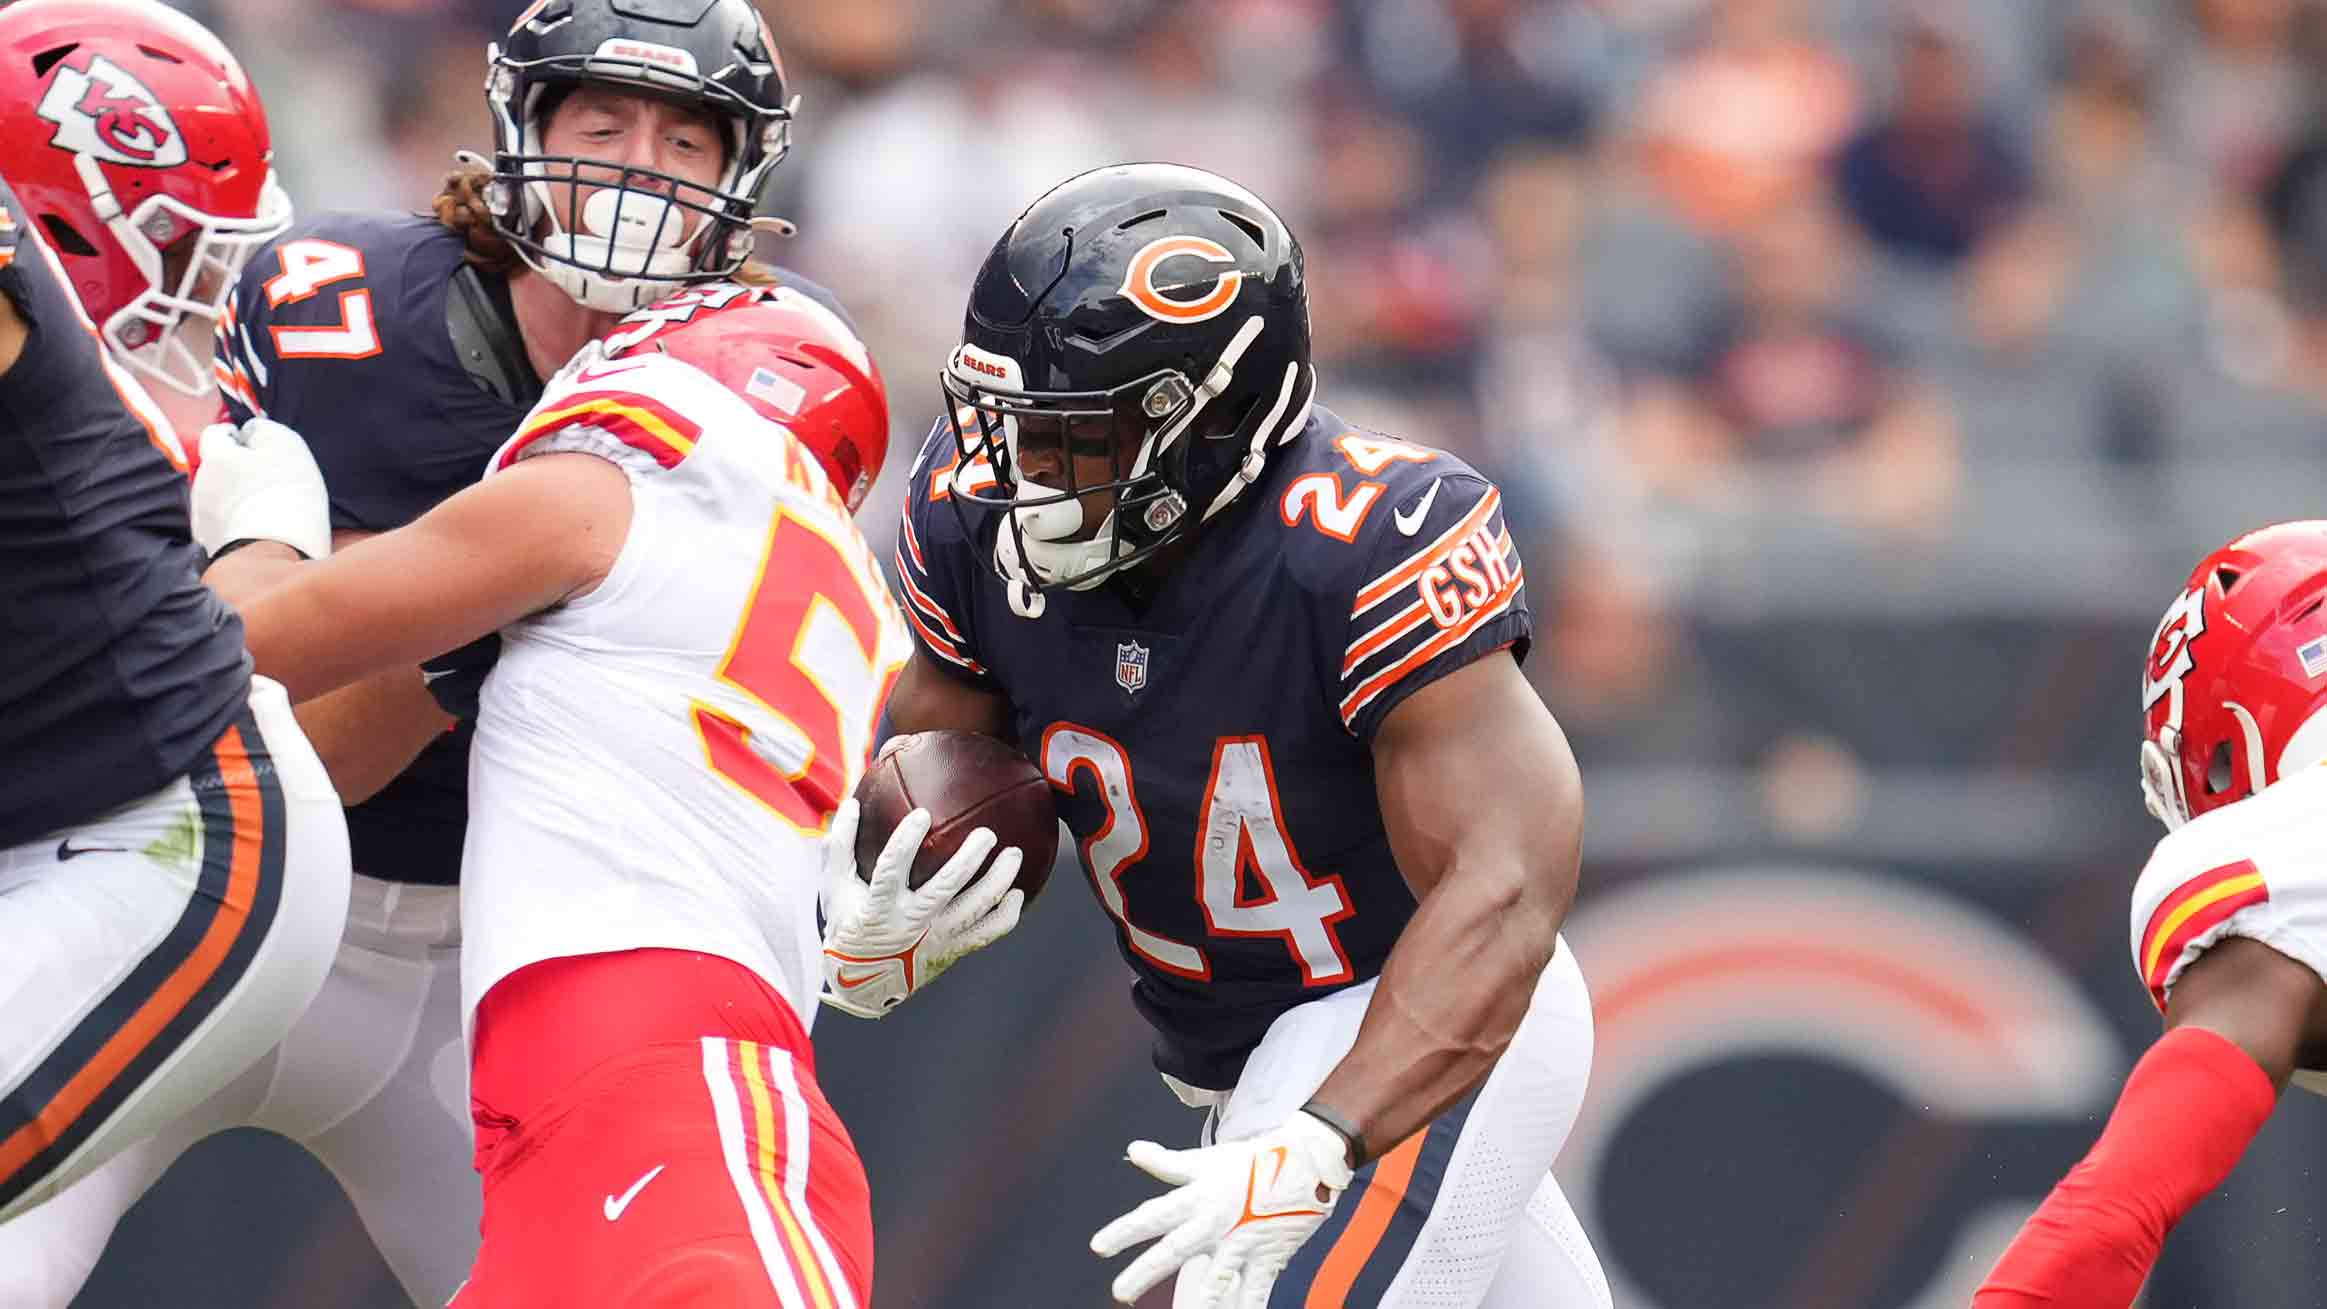 Bears vs. Chiefs Livestream: How to Watch NFL Week 3 Online Today